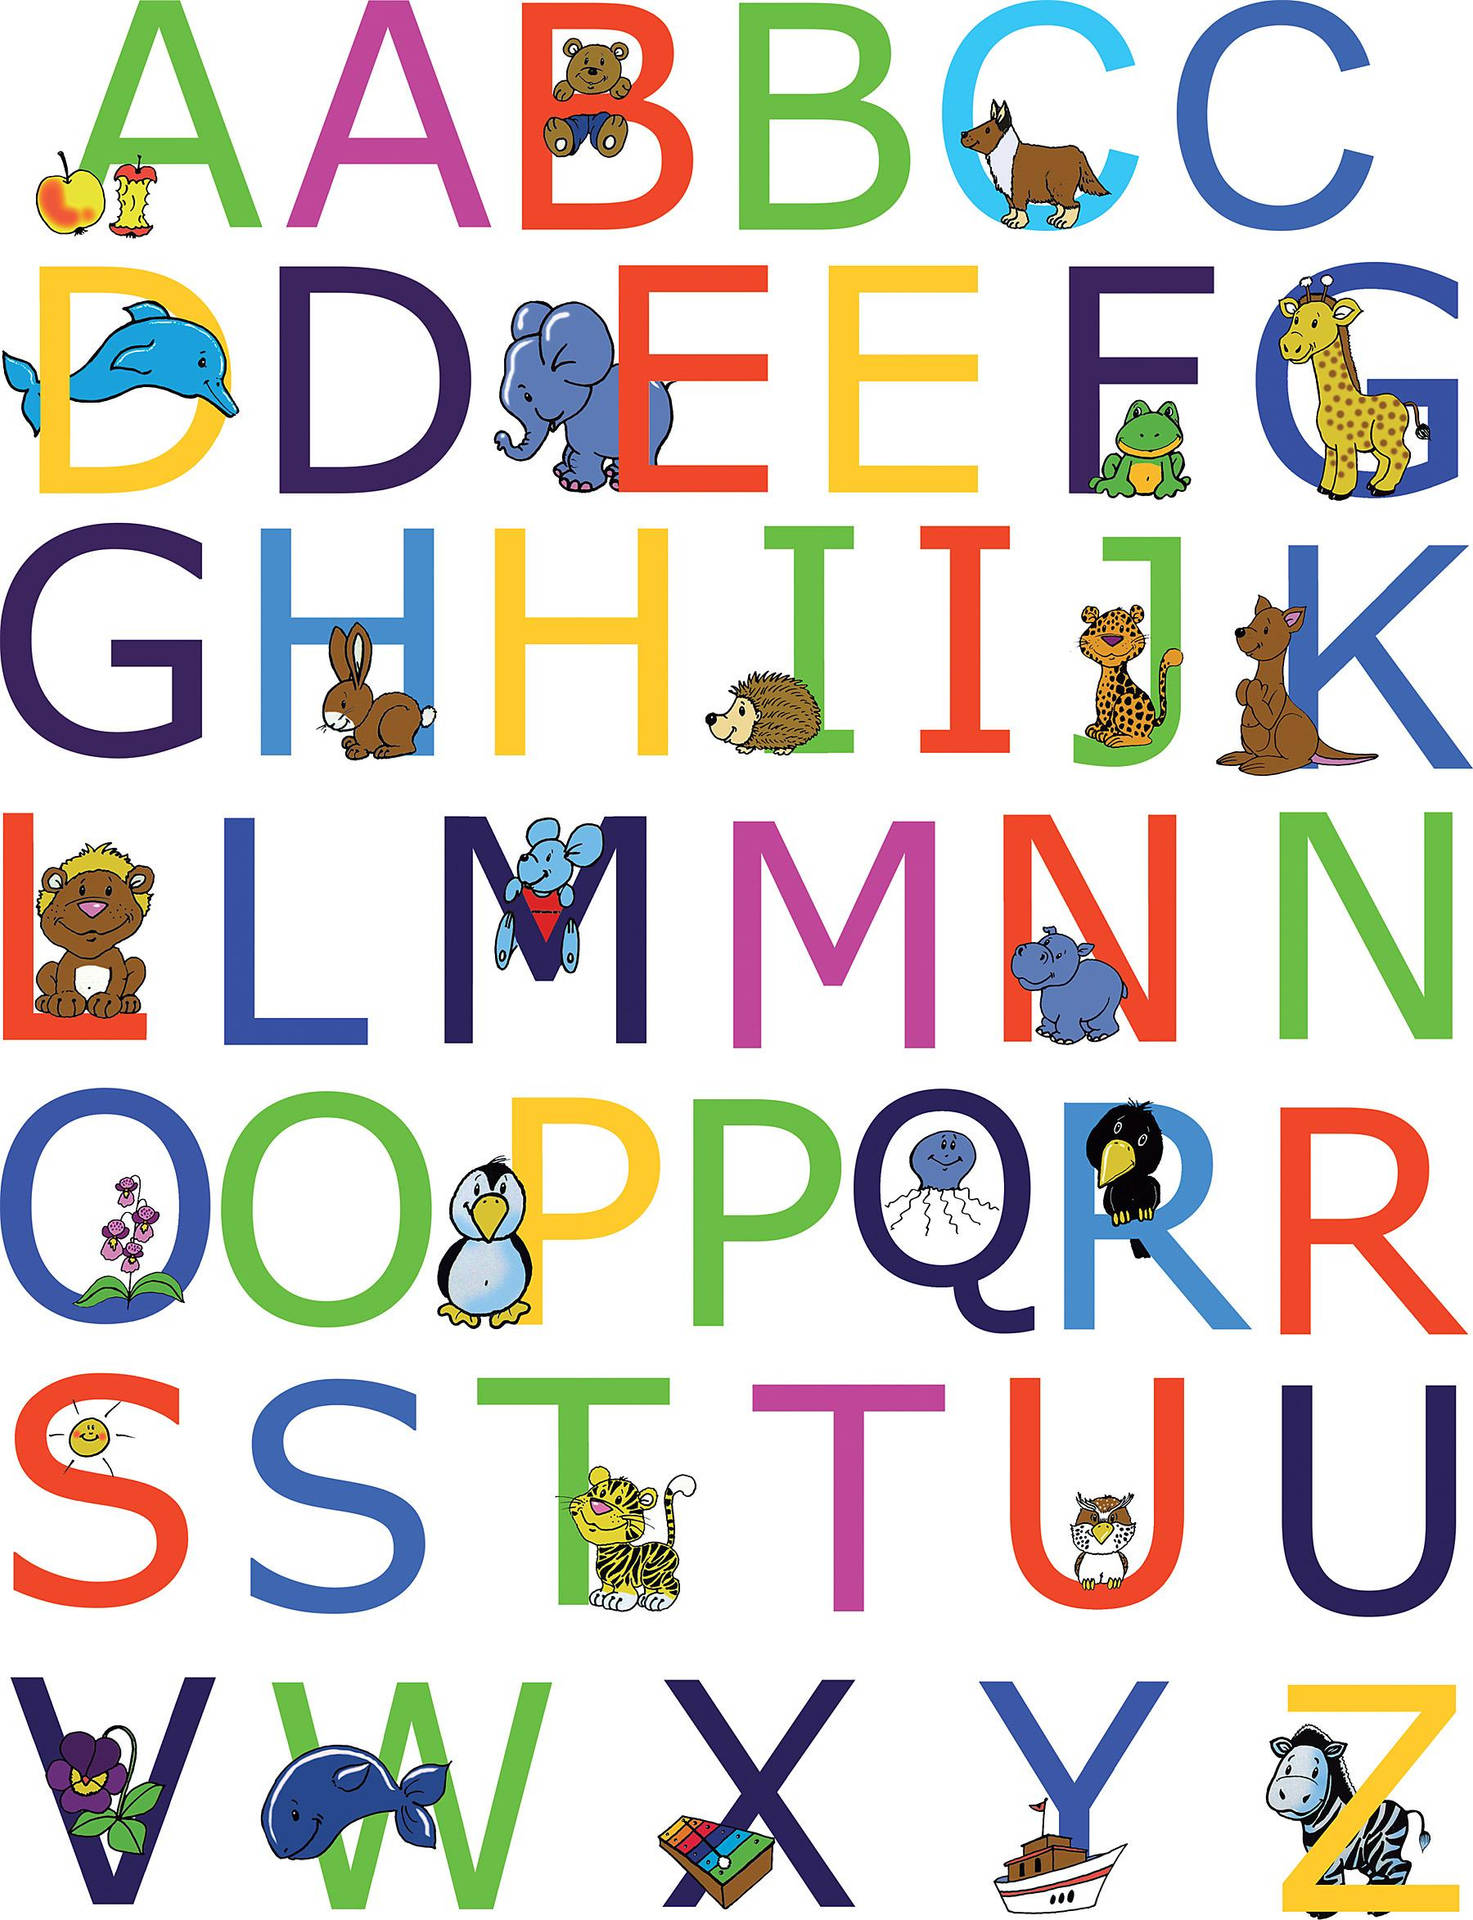 Abc Animals And Objects Chart Wallpaper